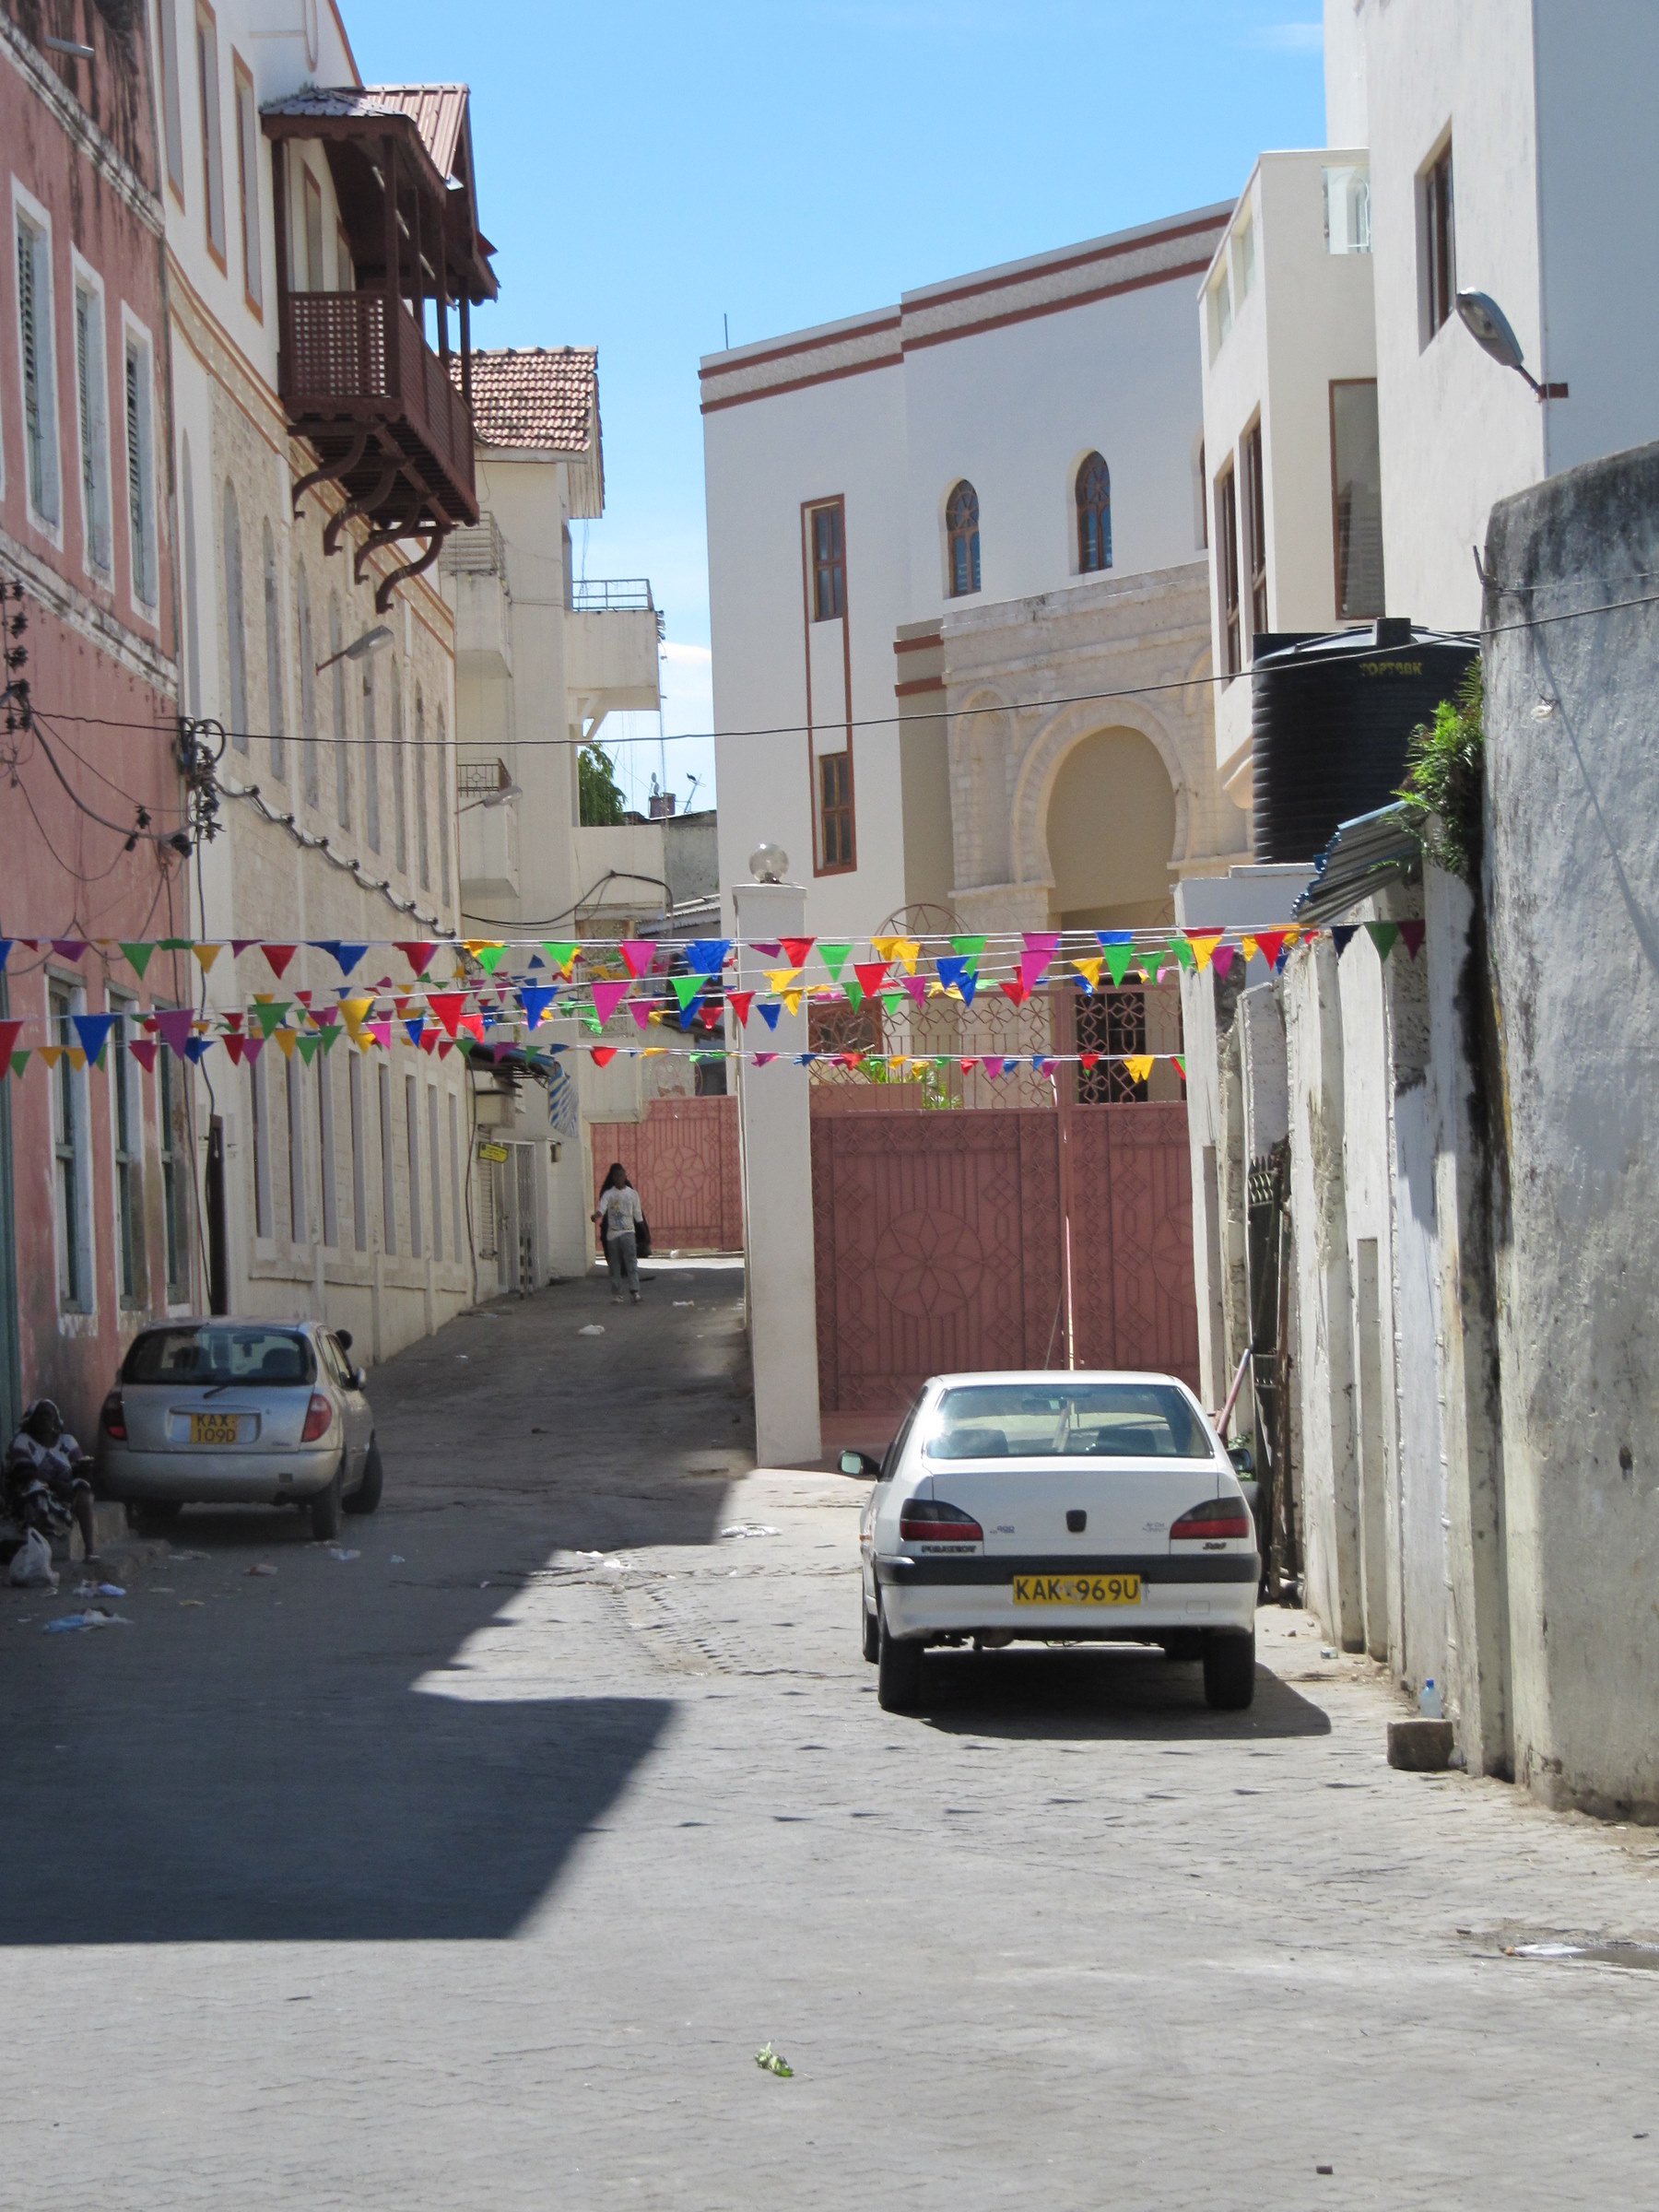 Mombasa Old Town